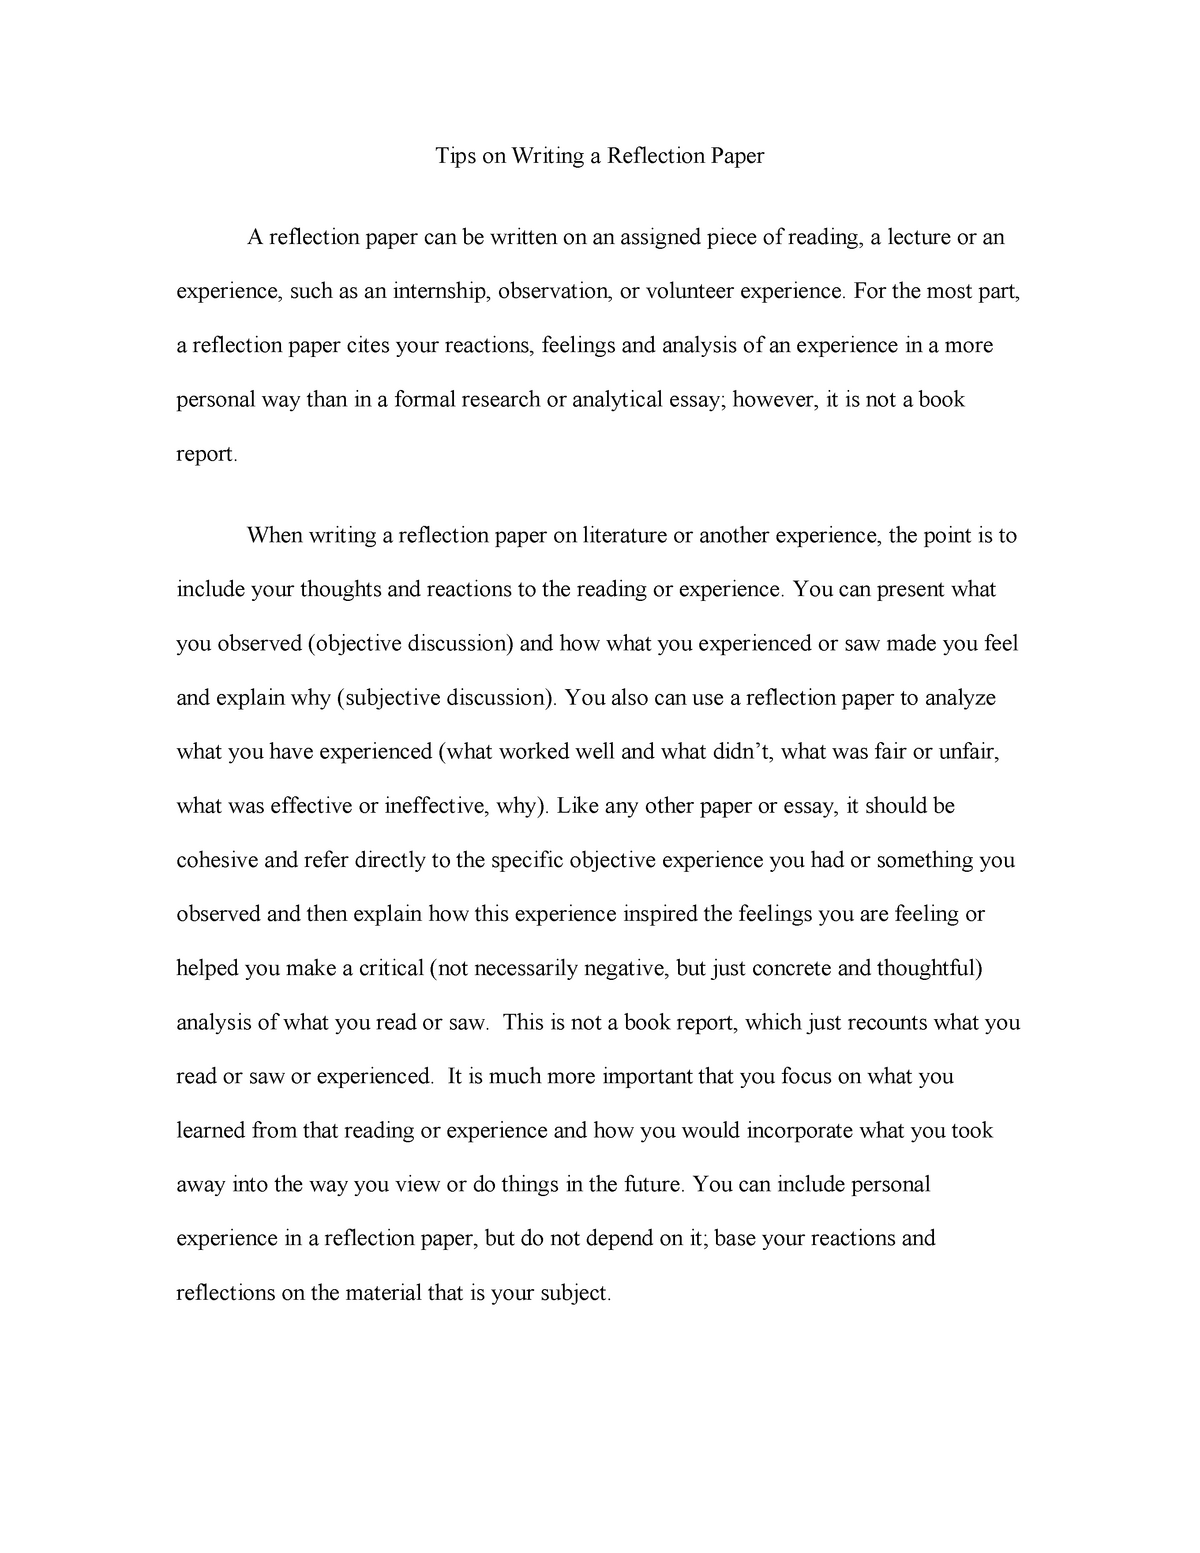 Tips On Writing A Reflection Paper Paper Reaction, PDF, Classroom